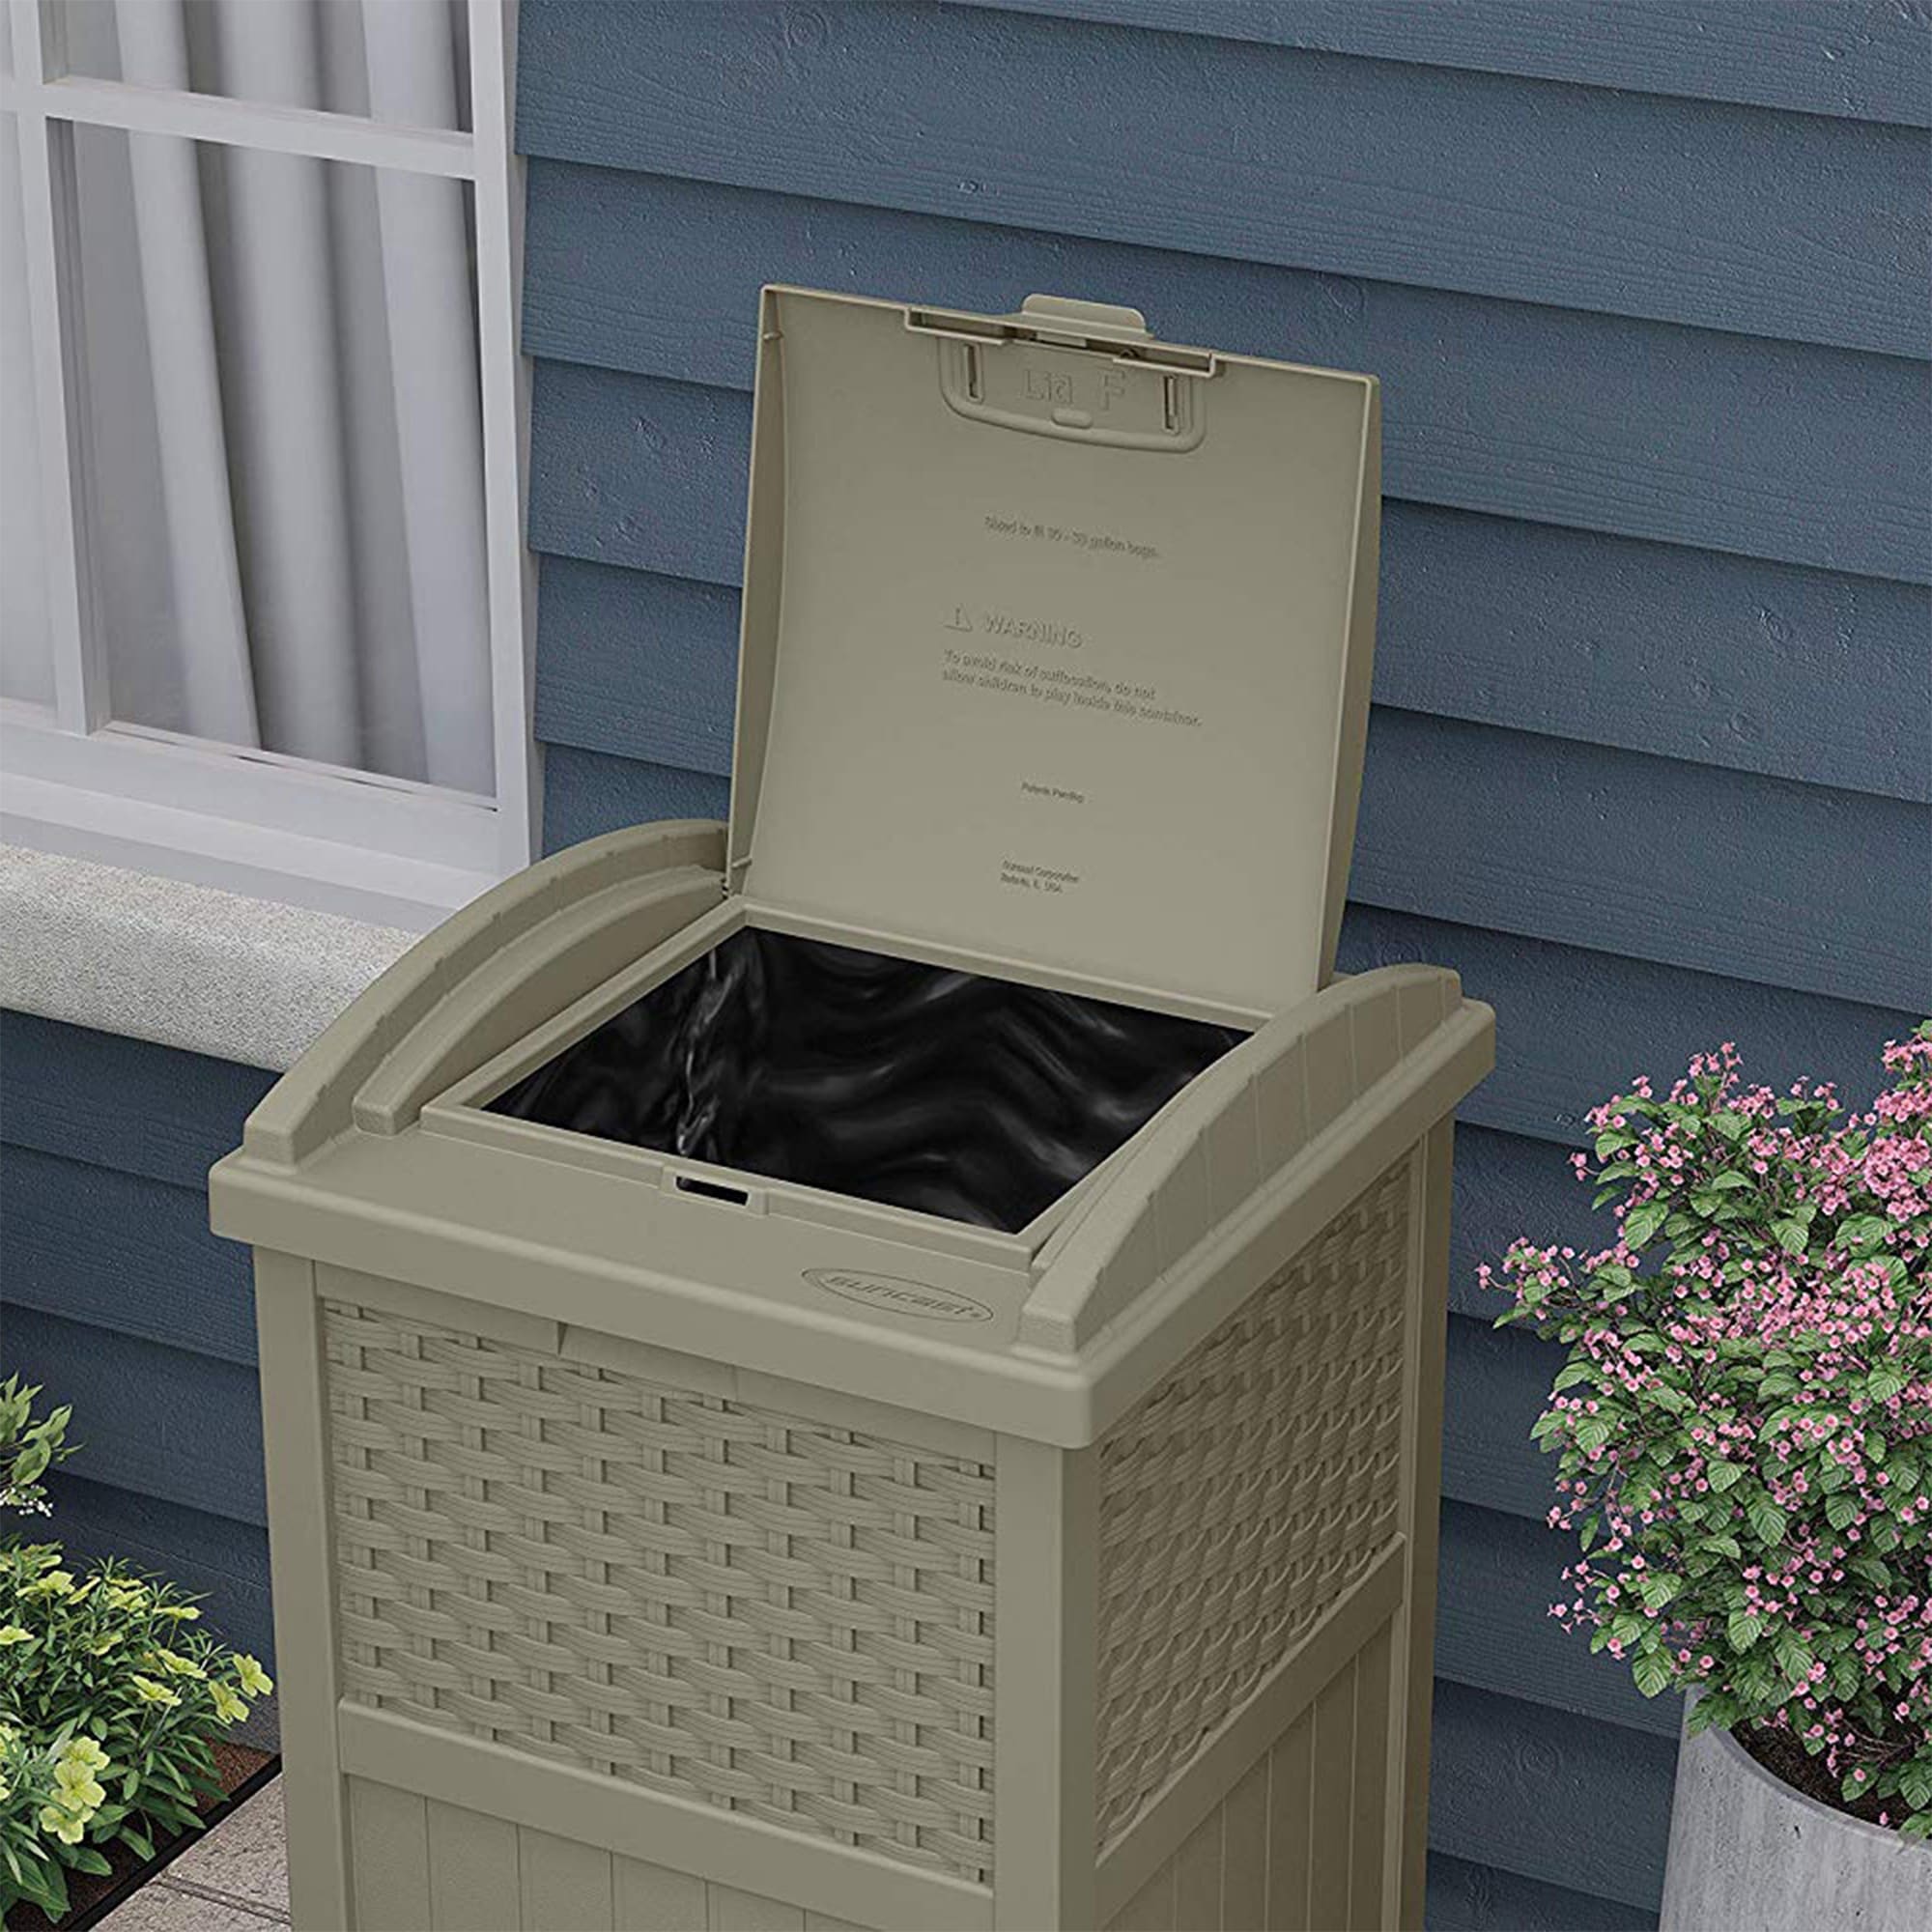 https://ak1.ostkcdn.com/images/products/is/images/direct/54556313b0d223021bf1e1cb4a08ced098d90249/Suncast-Wicker-Plastic-Hideaway-Trash-Can-with-Latching-Lid%2C-Dark-Taupe-%284-Pack%29.jpg